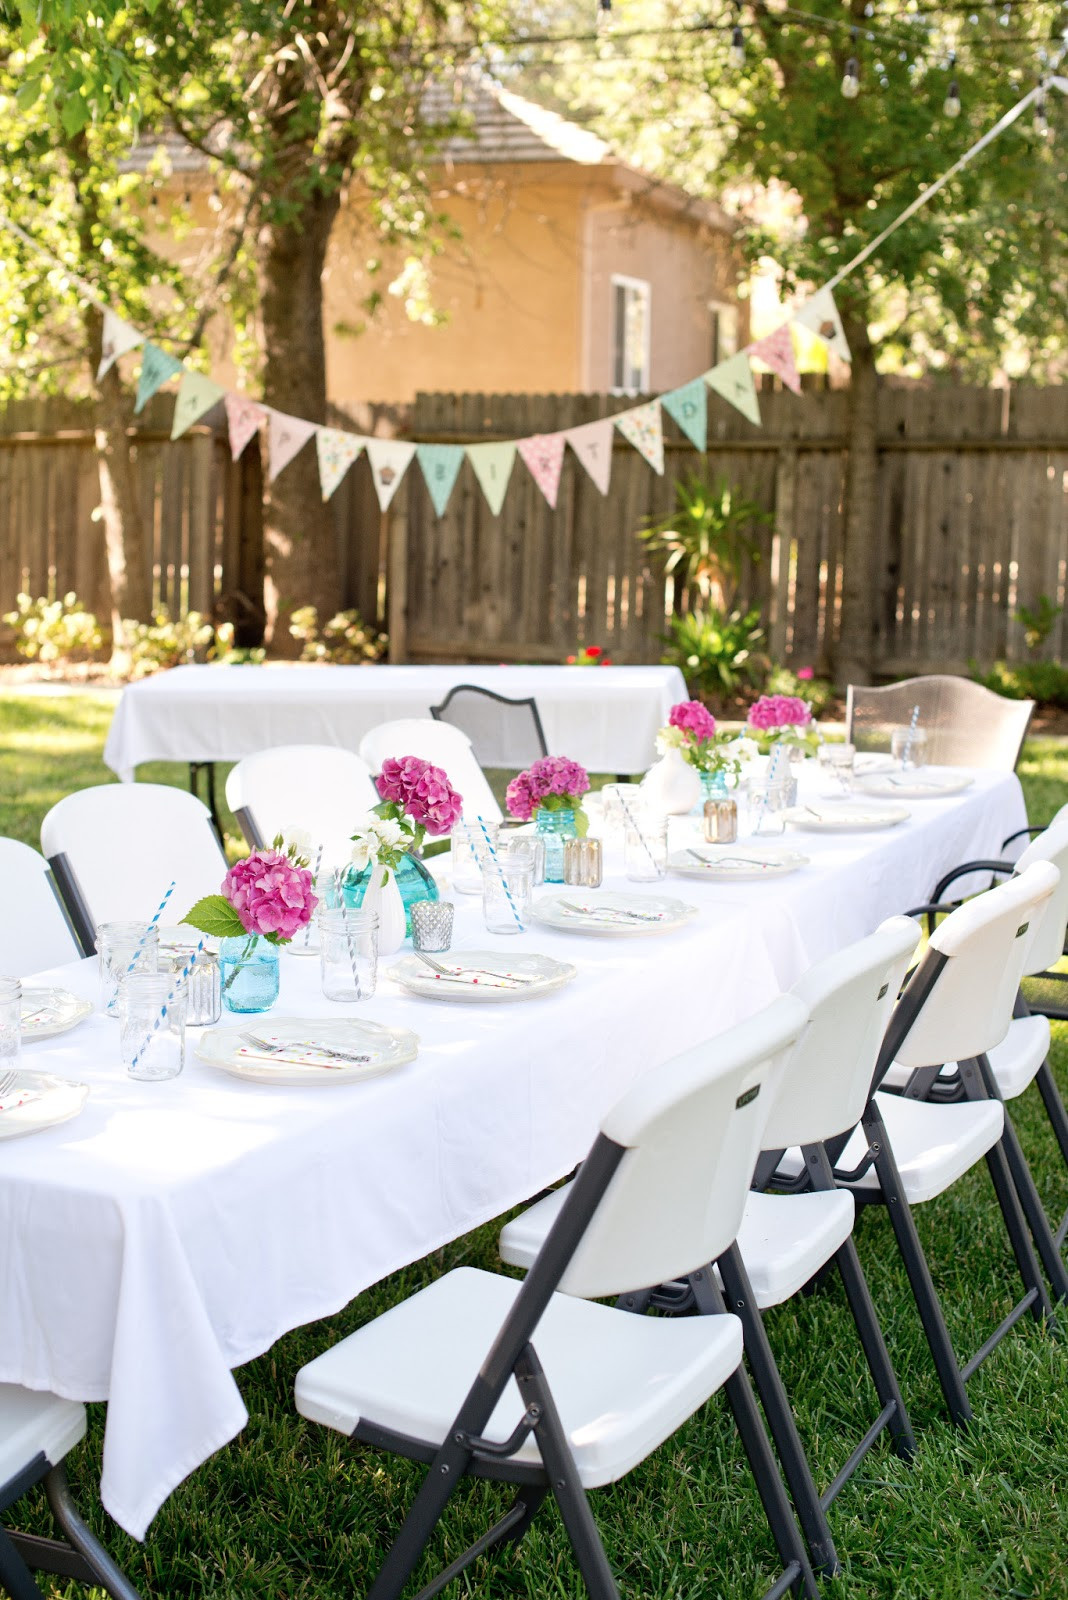 Ideas To Decorate Backyard For Engagement Party
 Domestic Fashionista Backyard Birthday Fun Pink